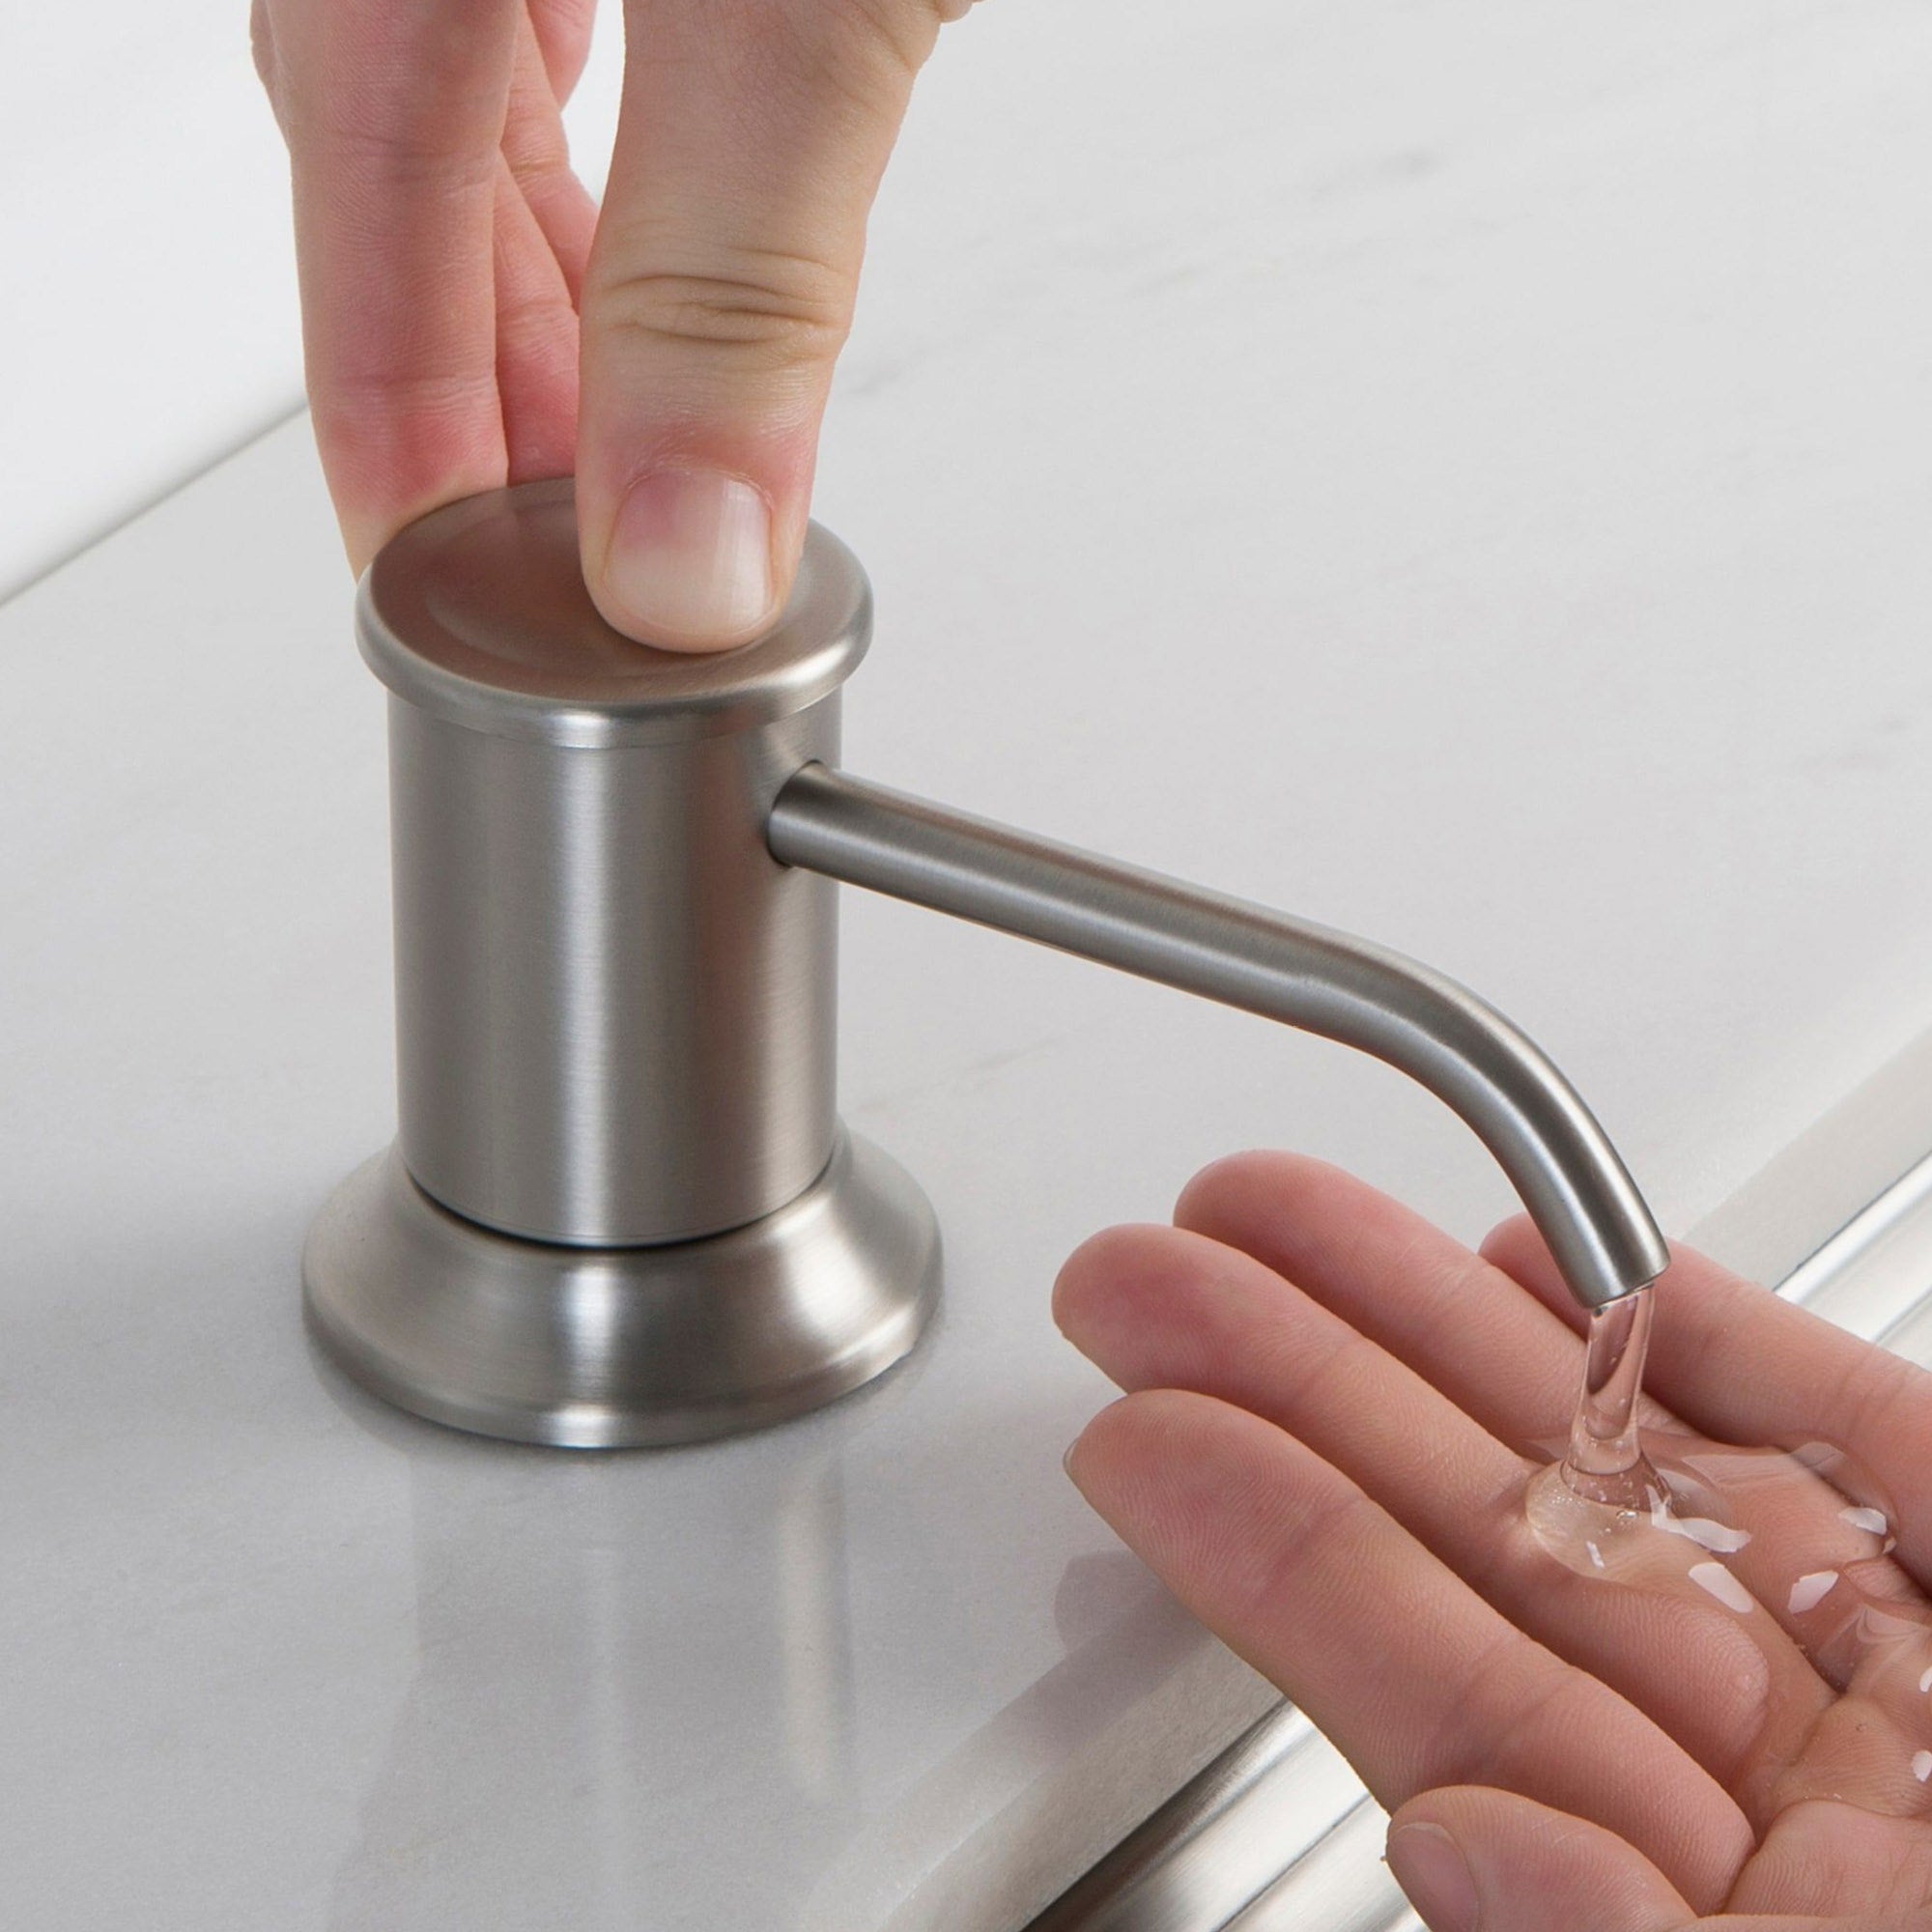 Pull-Down Kitchen Faucet and Soap Dispenser